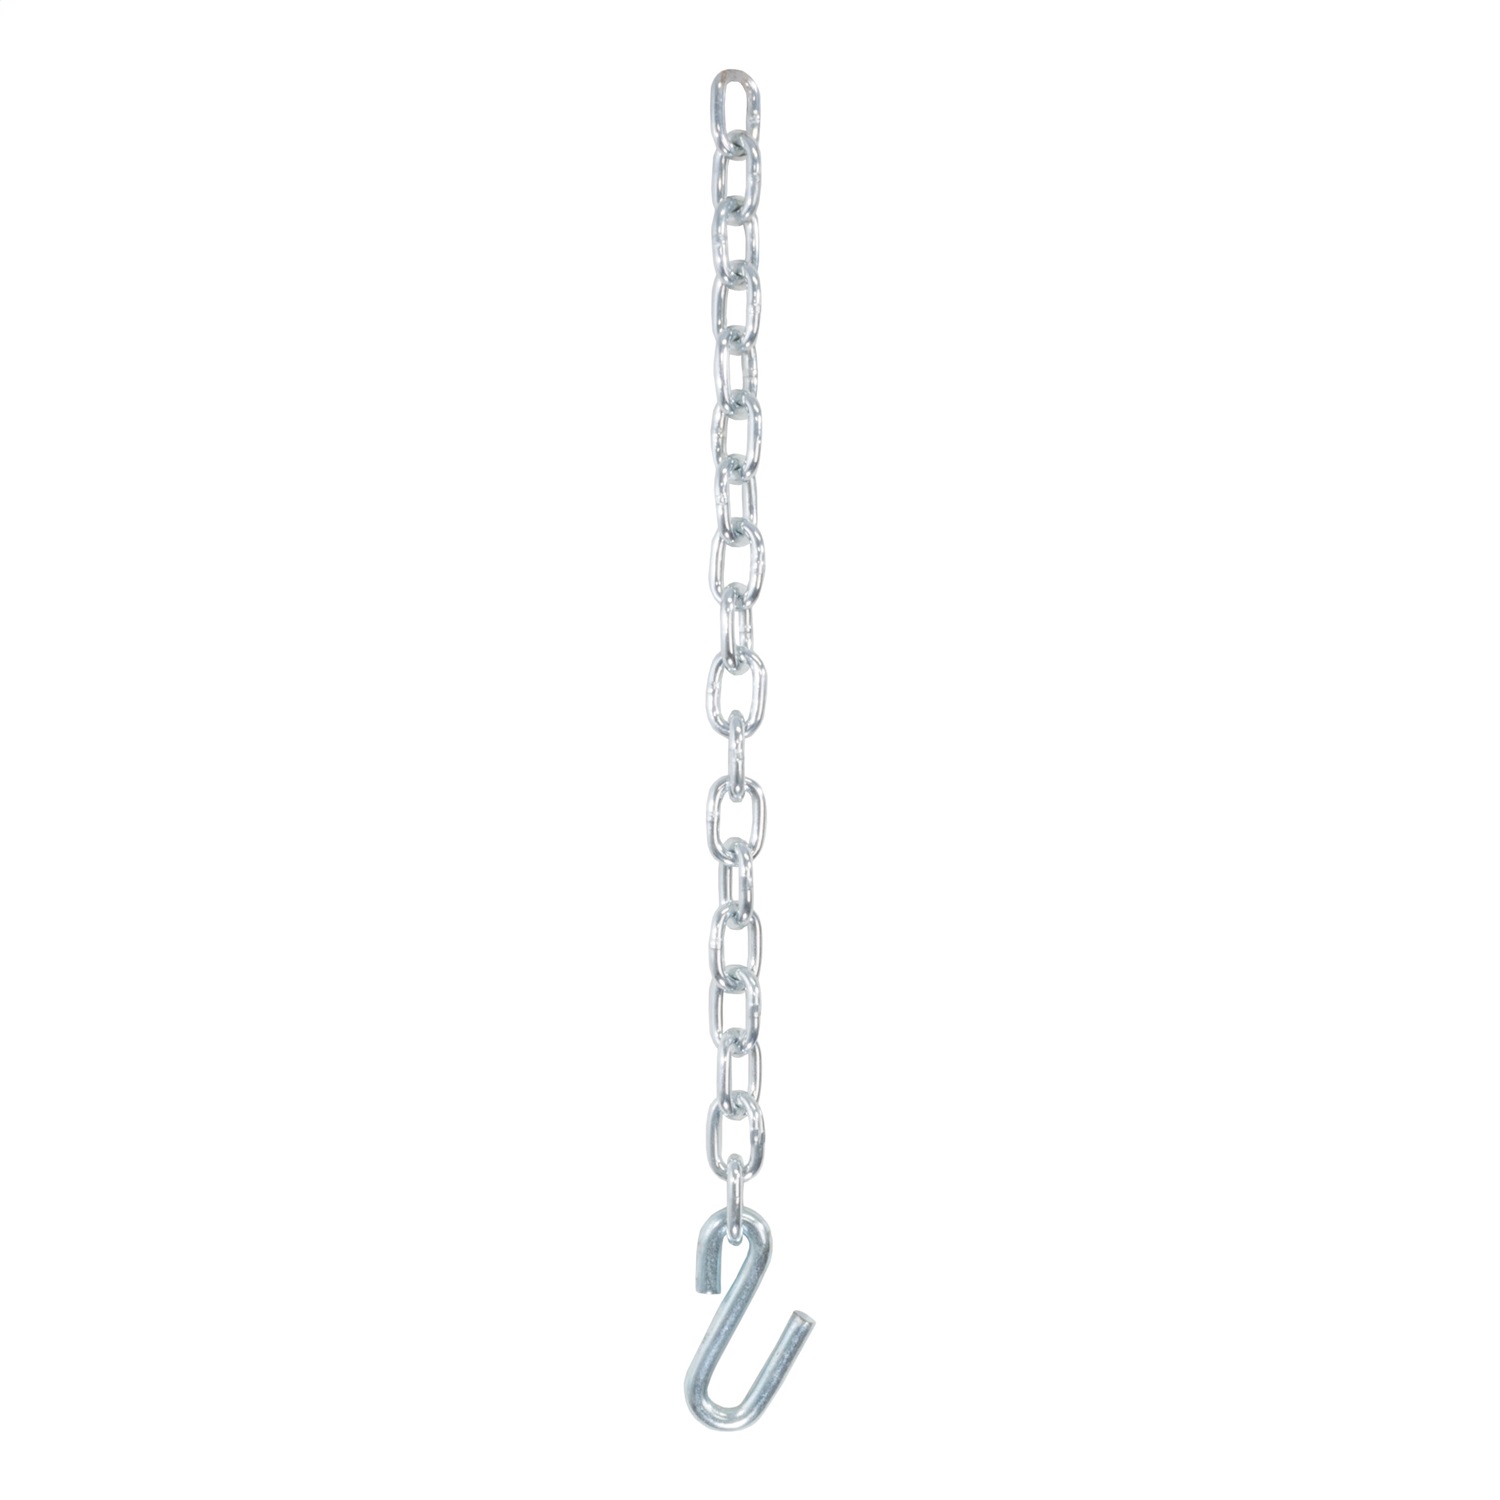 CURT Manufacturing CURT Manufacturing 80300 Safety Chain Assembly  Fits